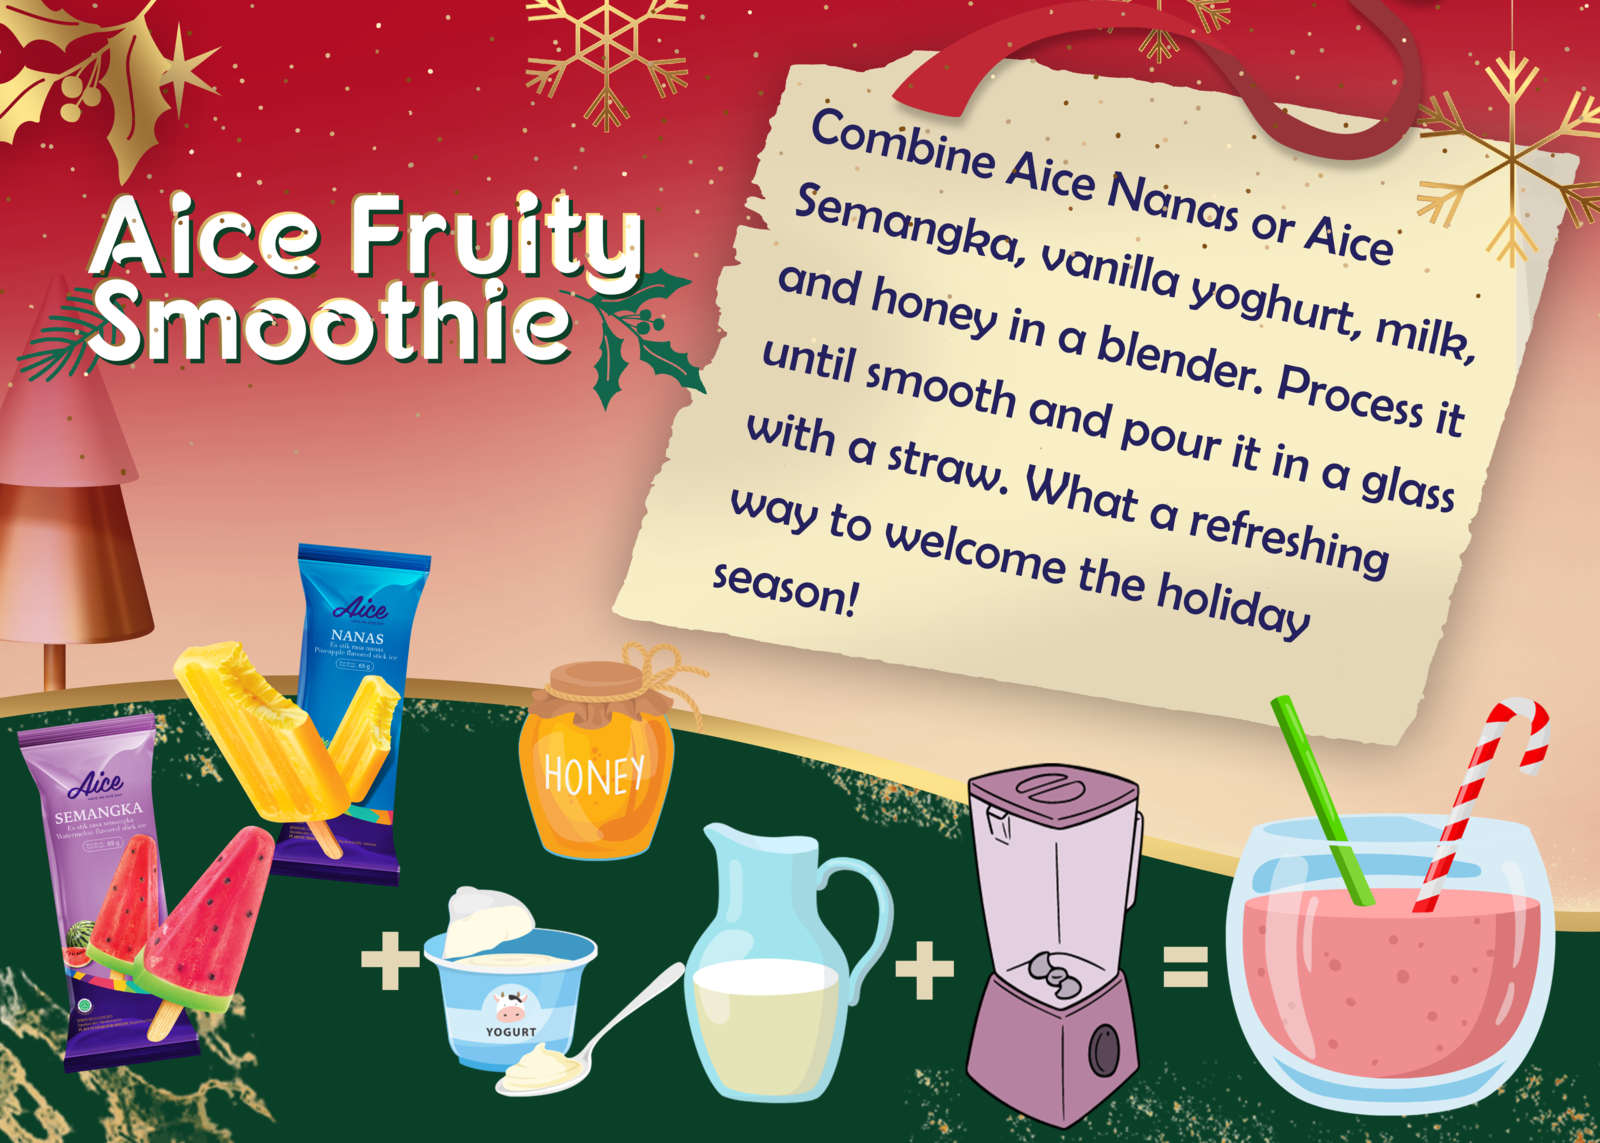 Aice_Fruity_Smoothie